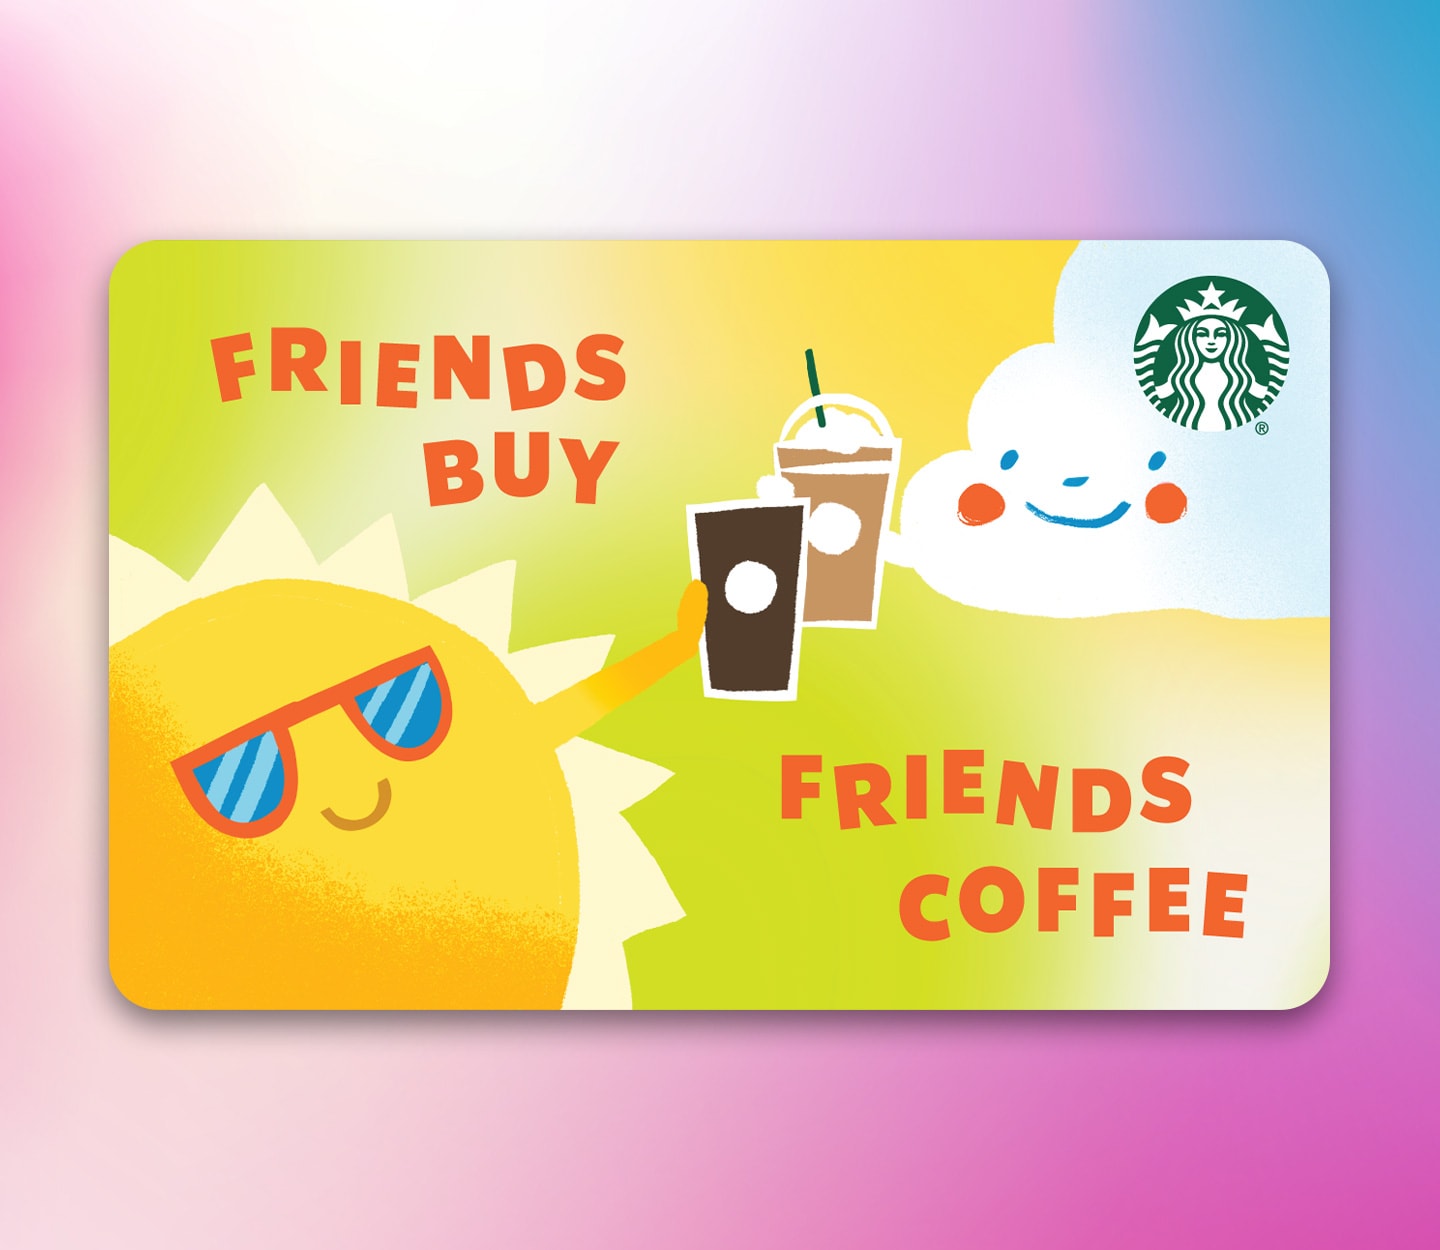 A Starbucks gift card that says, “Friends buy friends coffee” and shows an illustrated sun sharing a coffee with a smiling cloud.